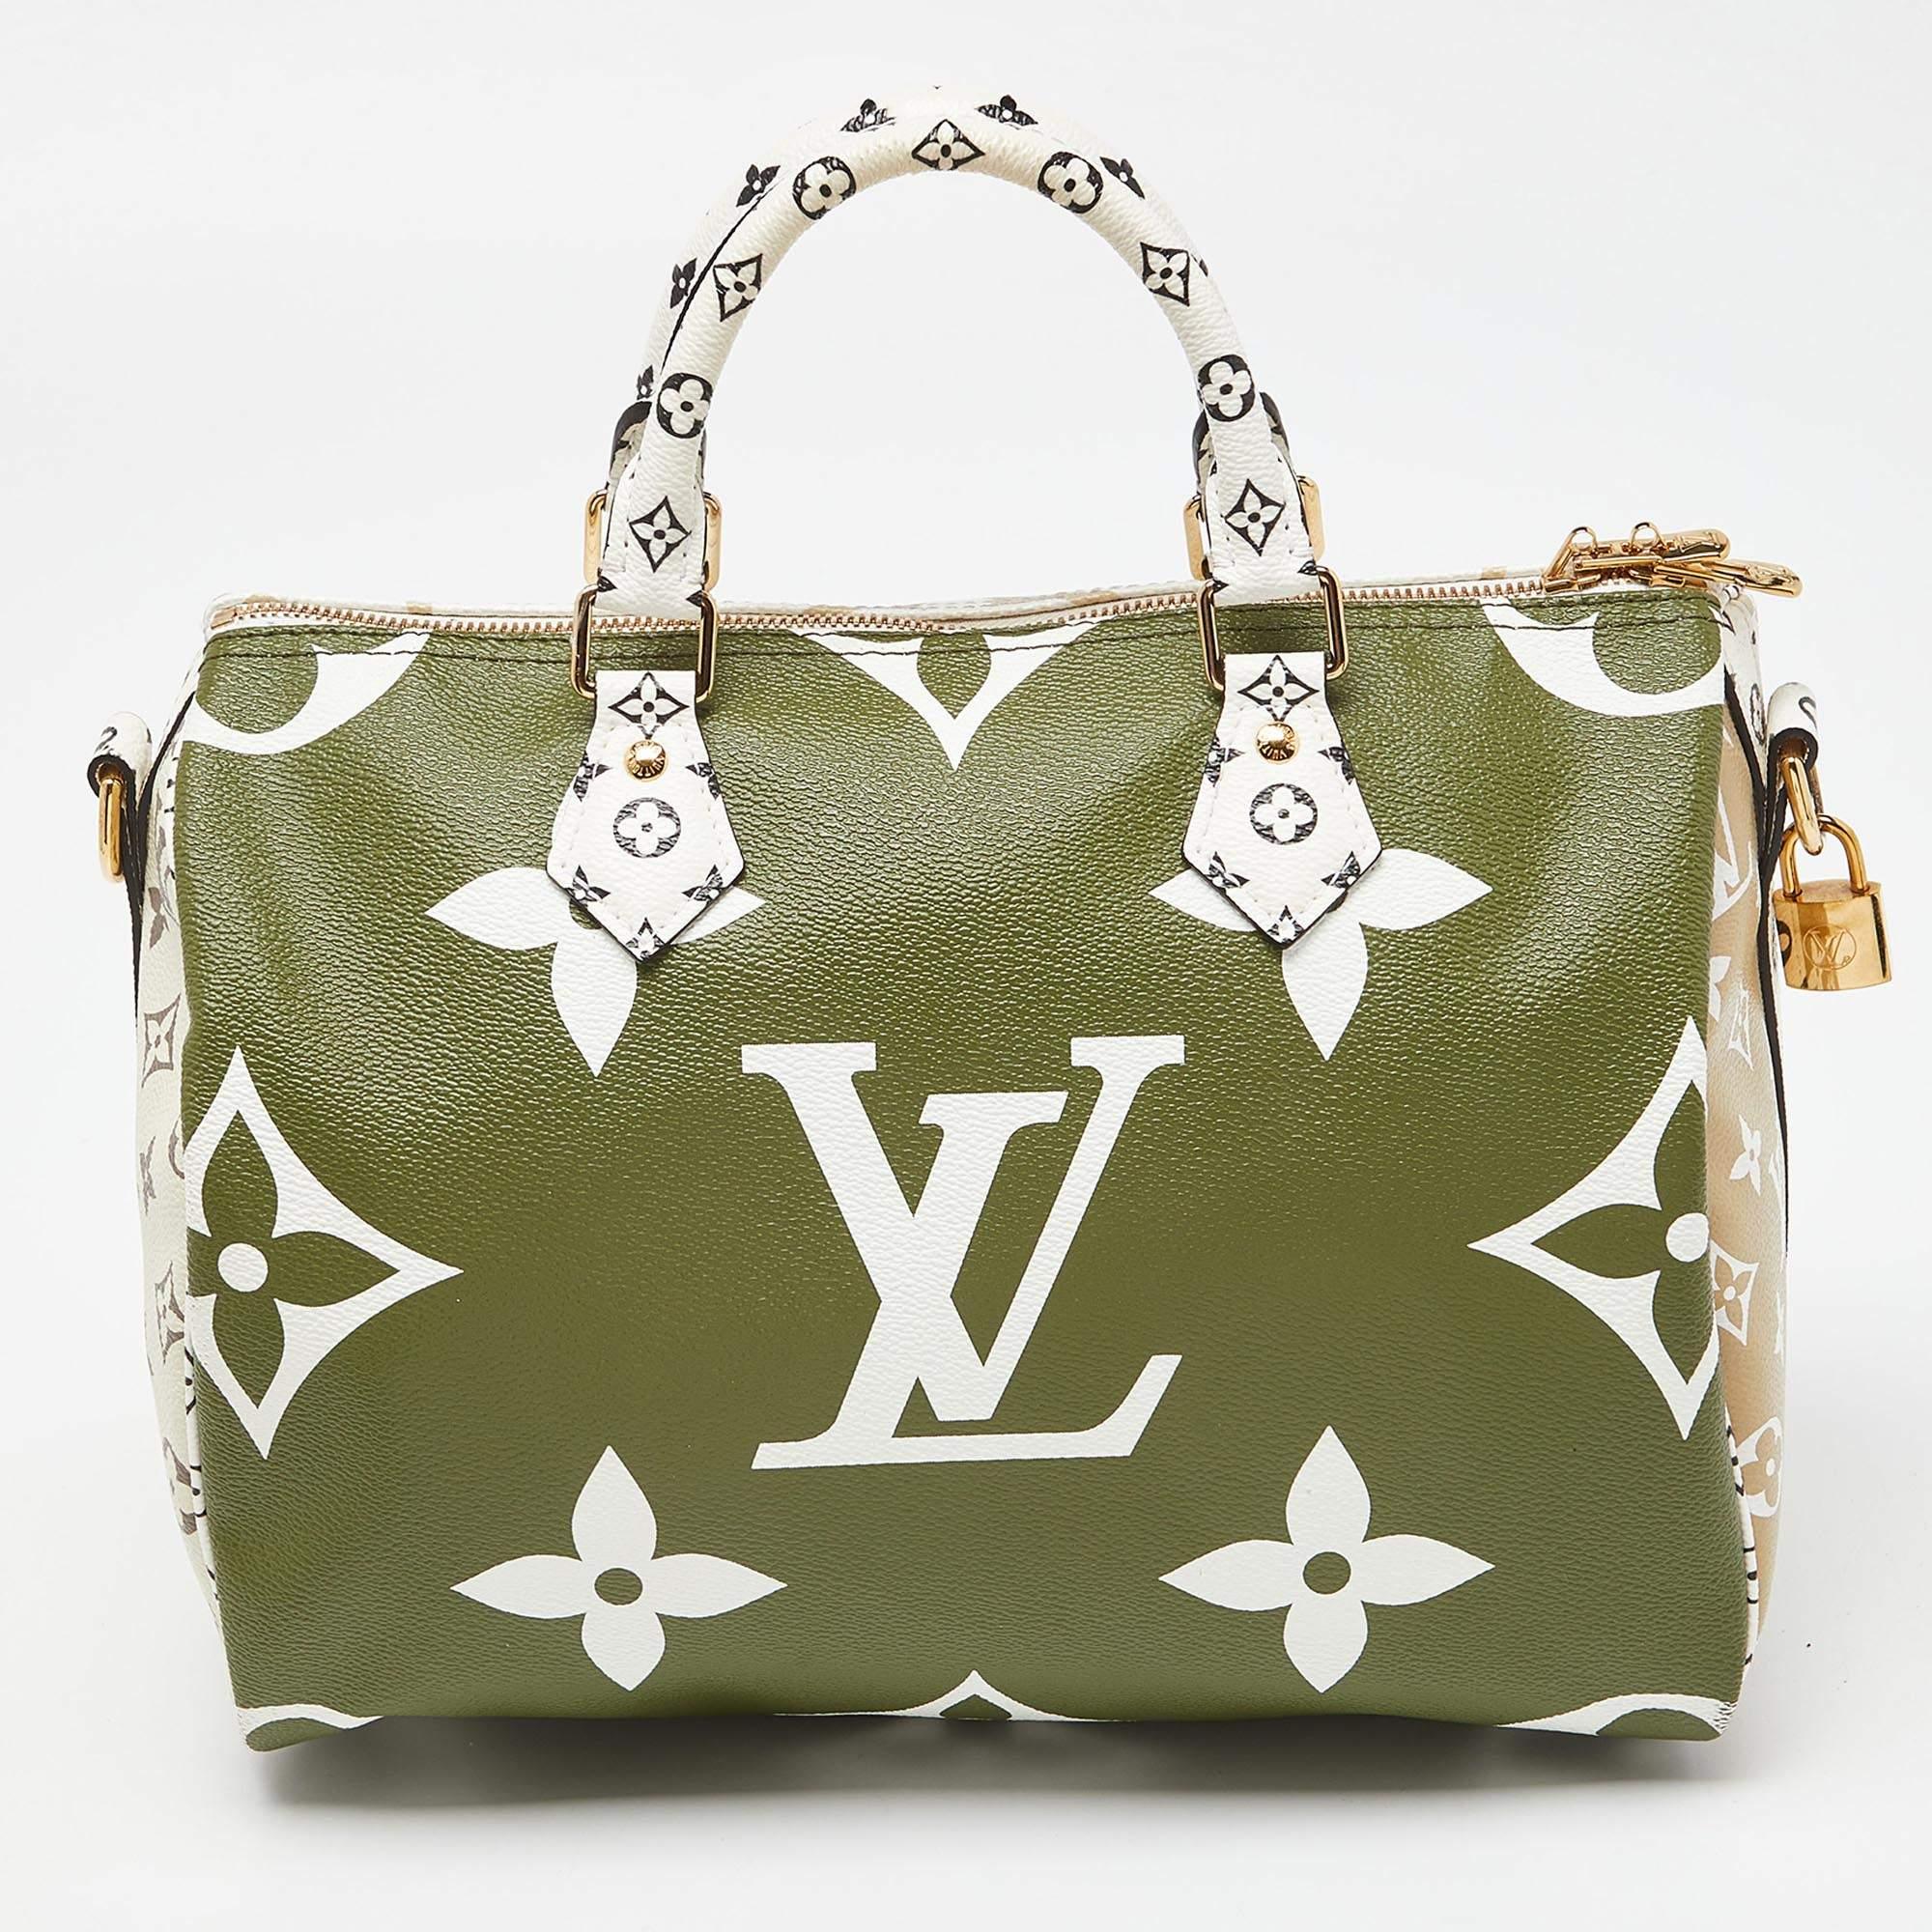 Titled as one of the greatest handbags in fashion, this Speedy Bandouliere 30 bag from Louis Vuitton offers unparalleled style and luxury to everyone. It is made from kaki-beige Monogram Giant canvas into an eye-catchy structure. It comes with